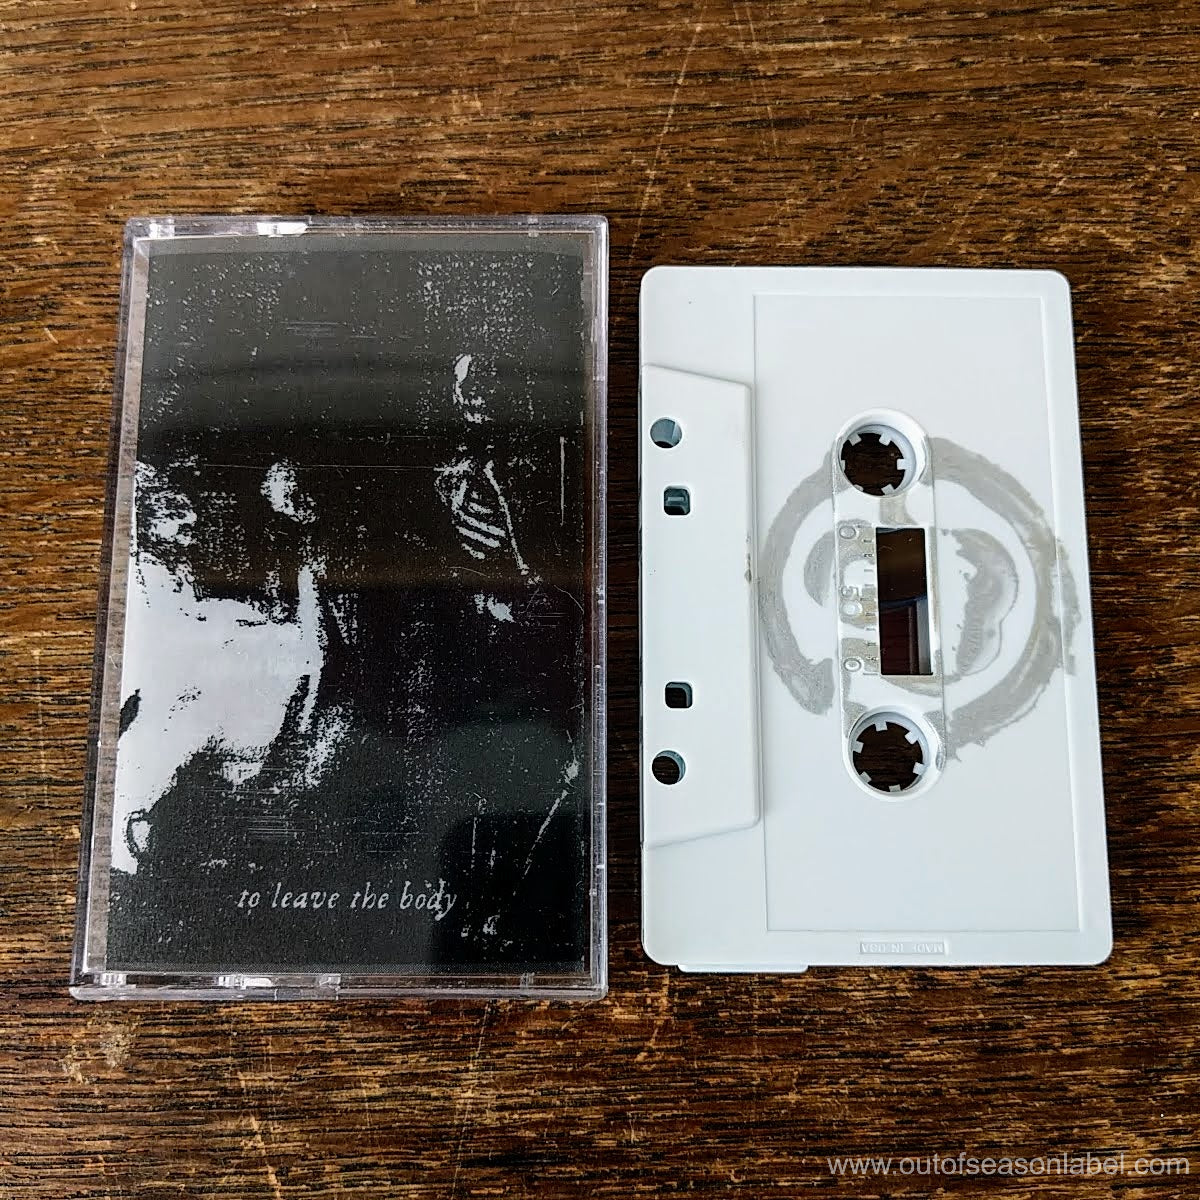 [SOLD OUT] OSSA CORONATA "To Leave The Body" Cassette Tape